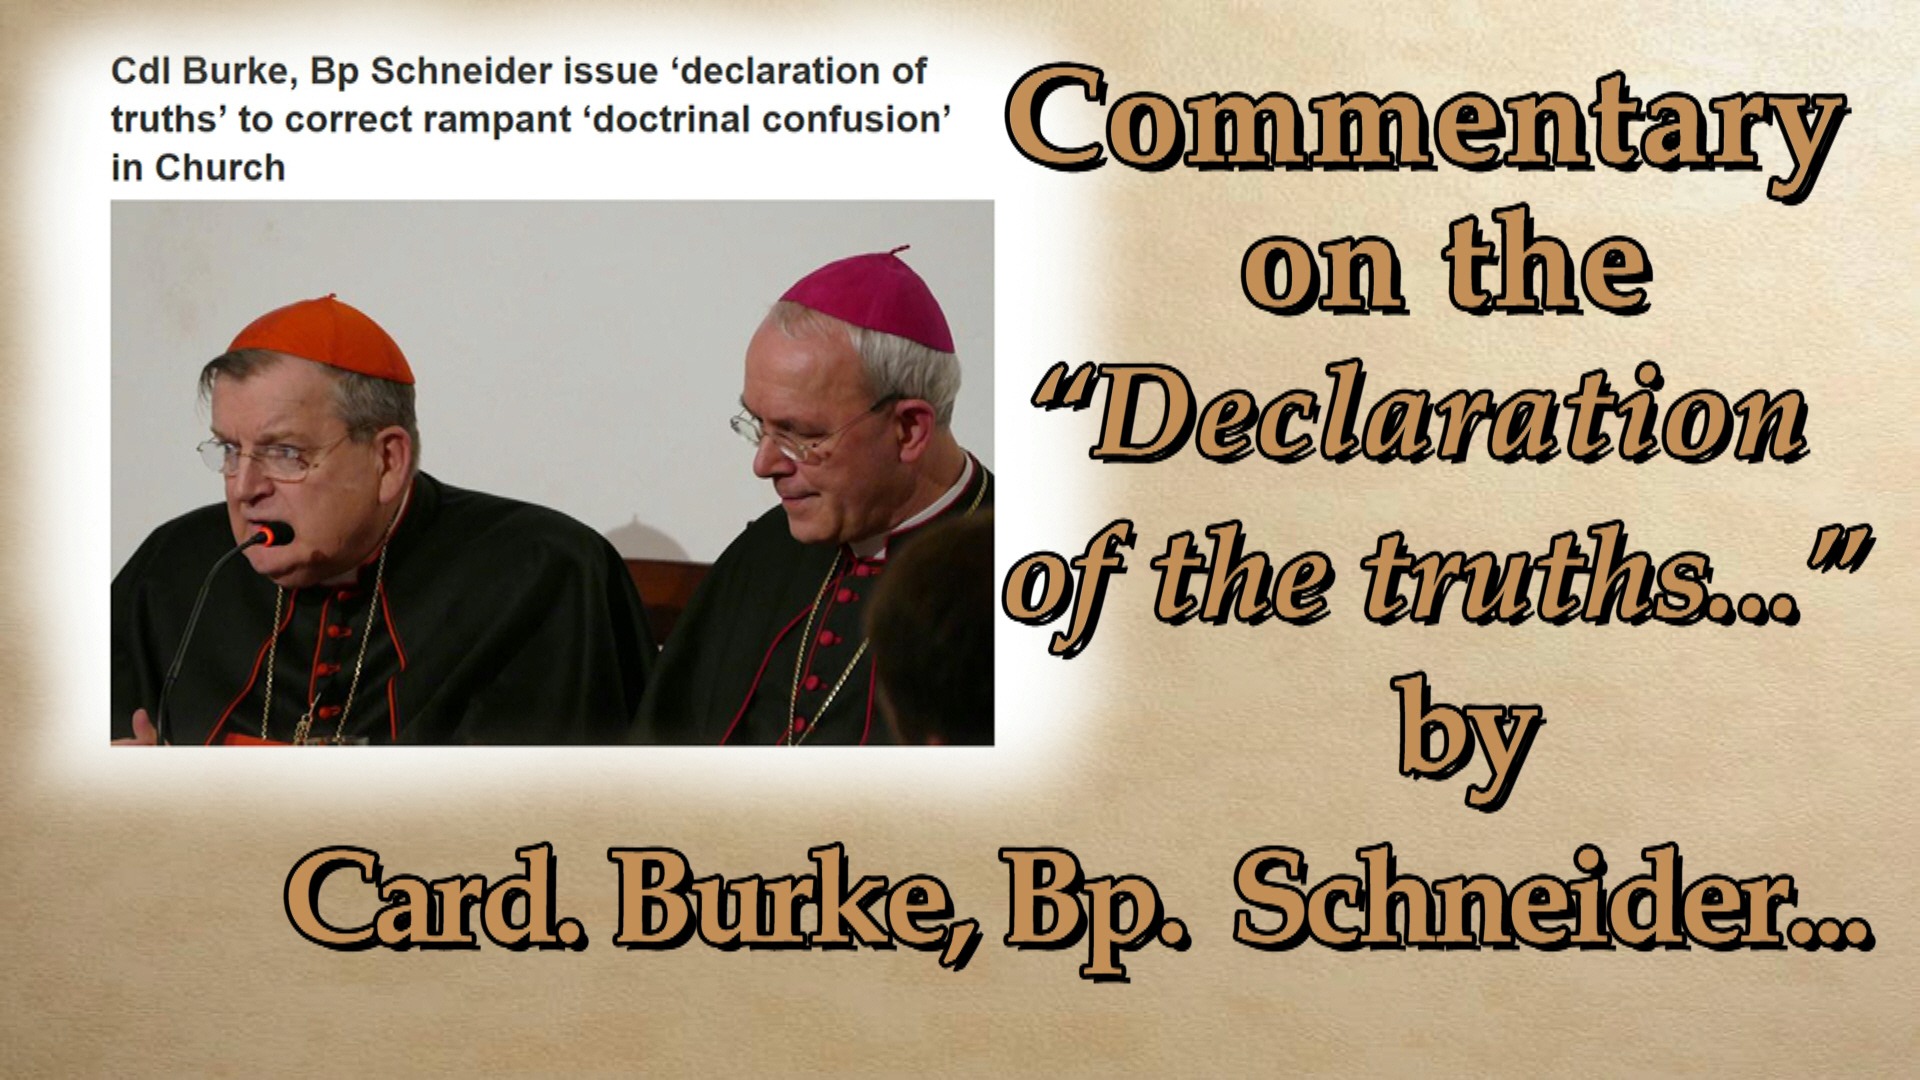 Commentary on the “Declaration of the truths...” by Card. Burke, Bp. Schneider...